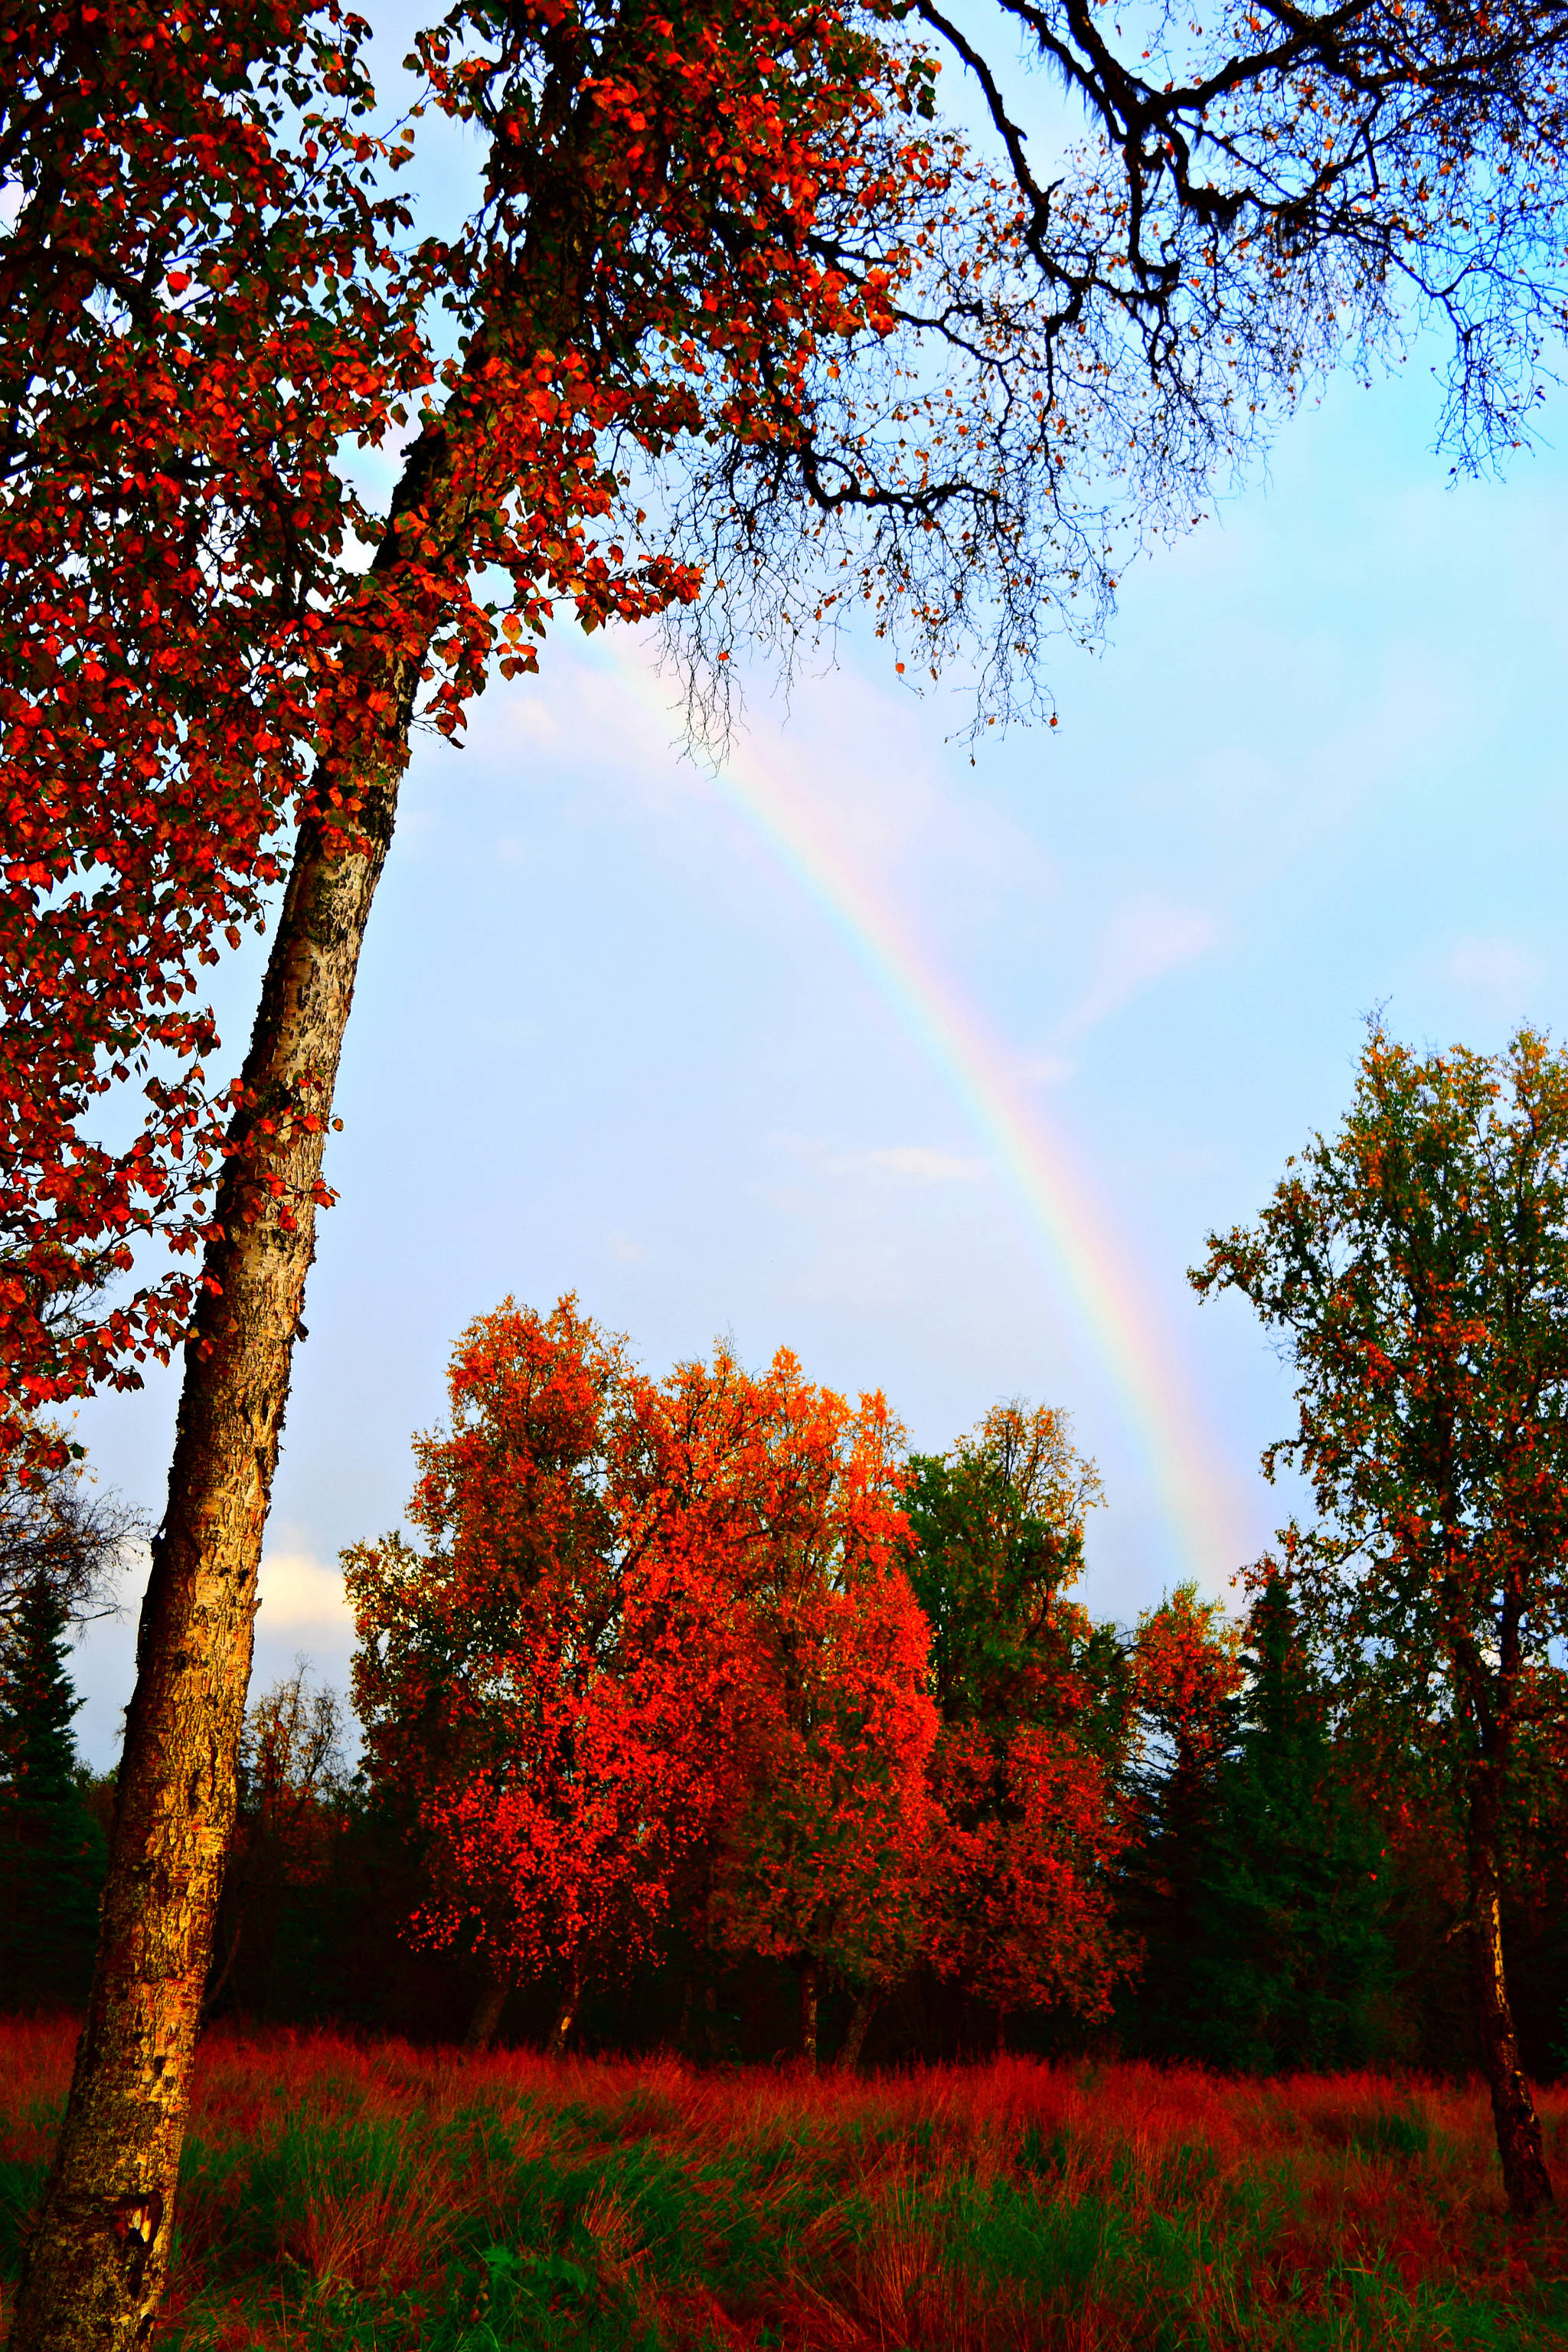 The sun shines on a birch forest and lights up a rainbow near East End Road on Sunday, Sept. 24 — evidence of why US News and World Report recently named Homer one of “50 Small Towns with Gorgeous Fall Foliage.” The birch leaves appear redder because of the angle of the sun on them.  The weekend forecast calls for sunshine, with temperatures in the mid-40s and mid-50s, a respite from recent long days of clouds and rain. (Photo by Jennifer Tarnacki, Homer News)